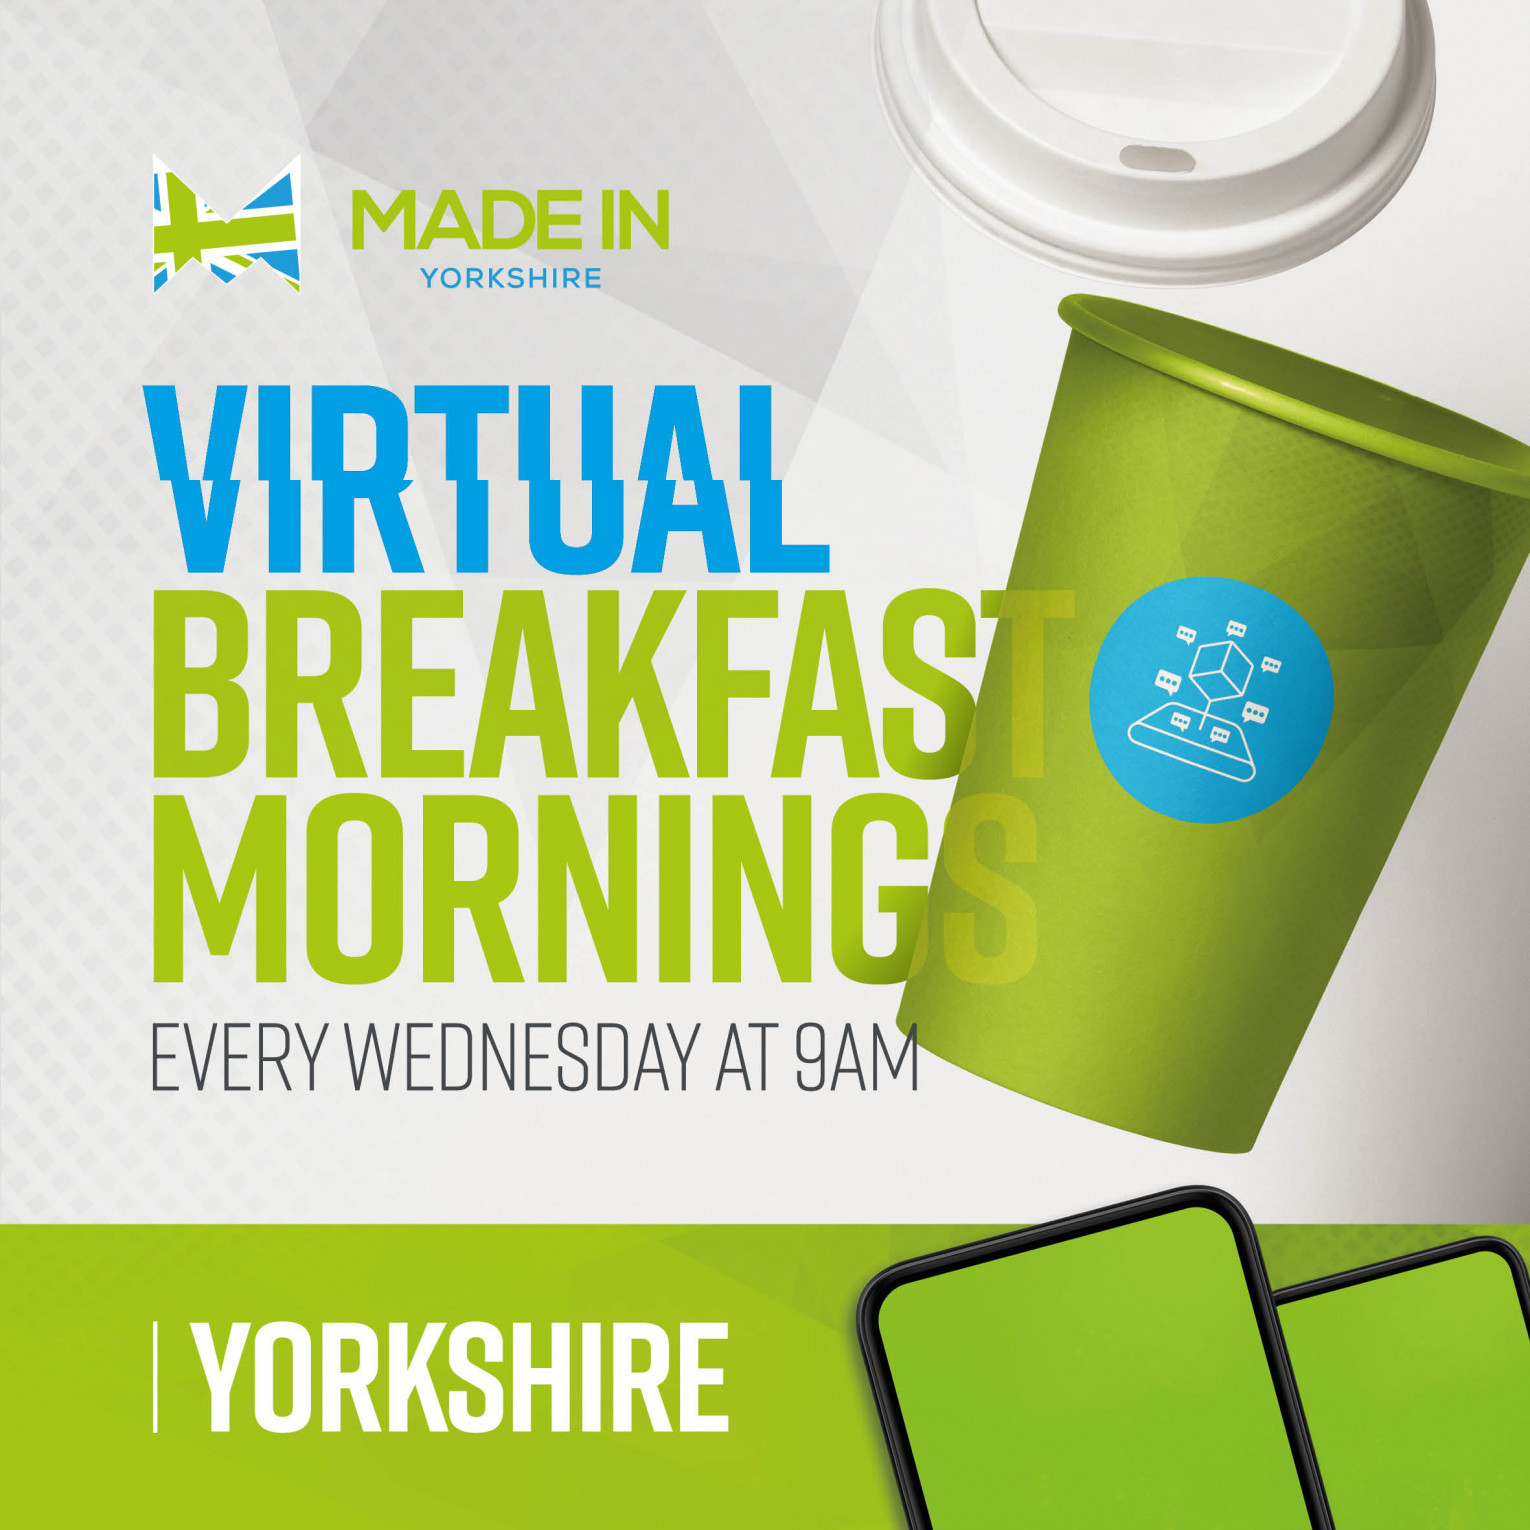 Made in Yorkshire Virtual Breakfast Networking event with CBE+